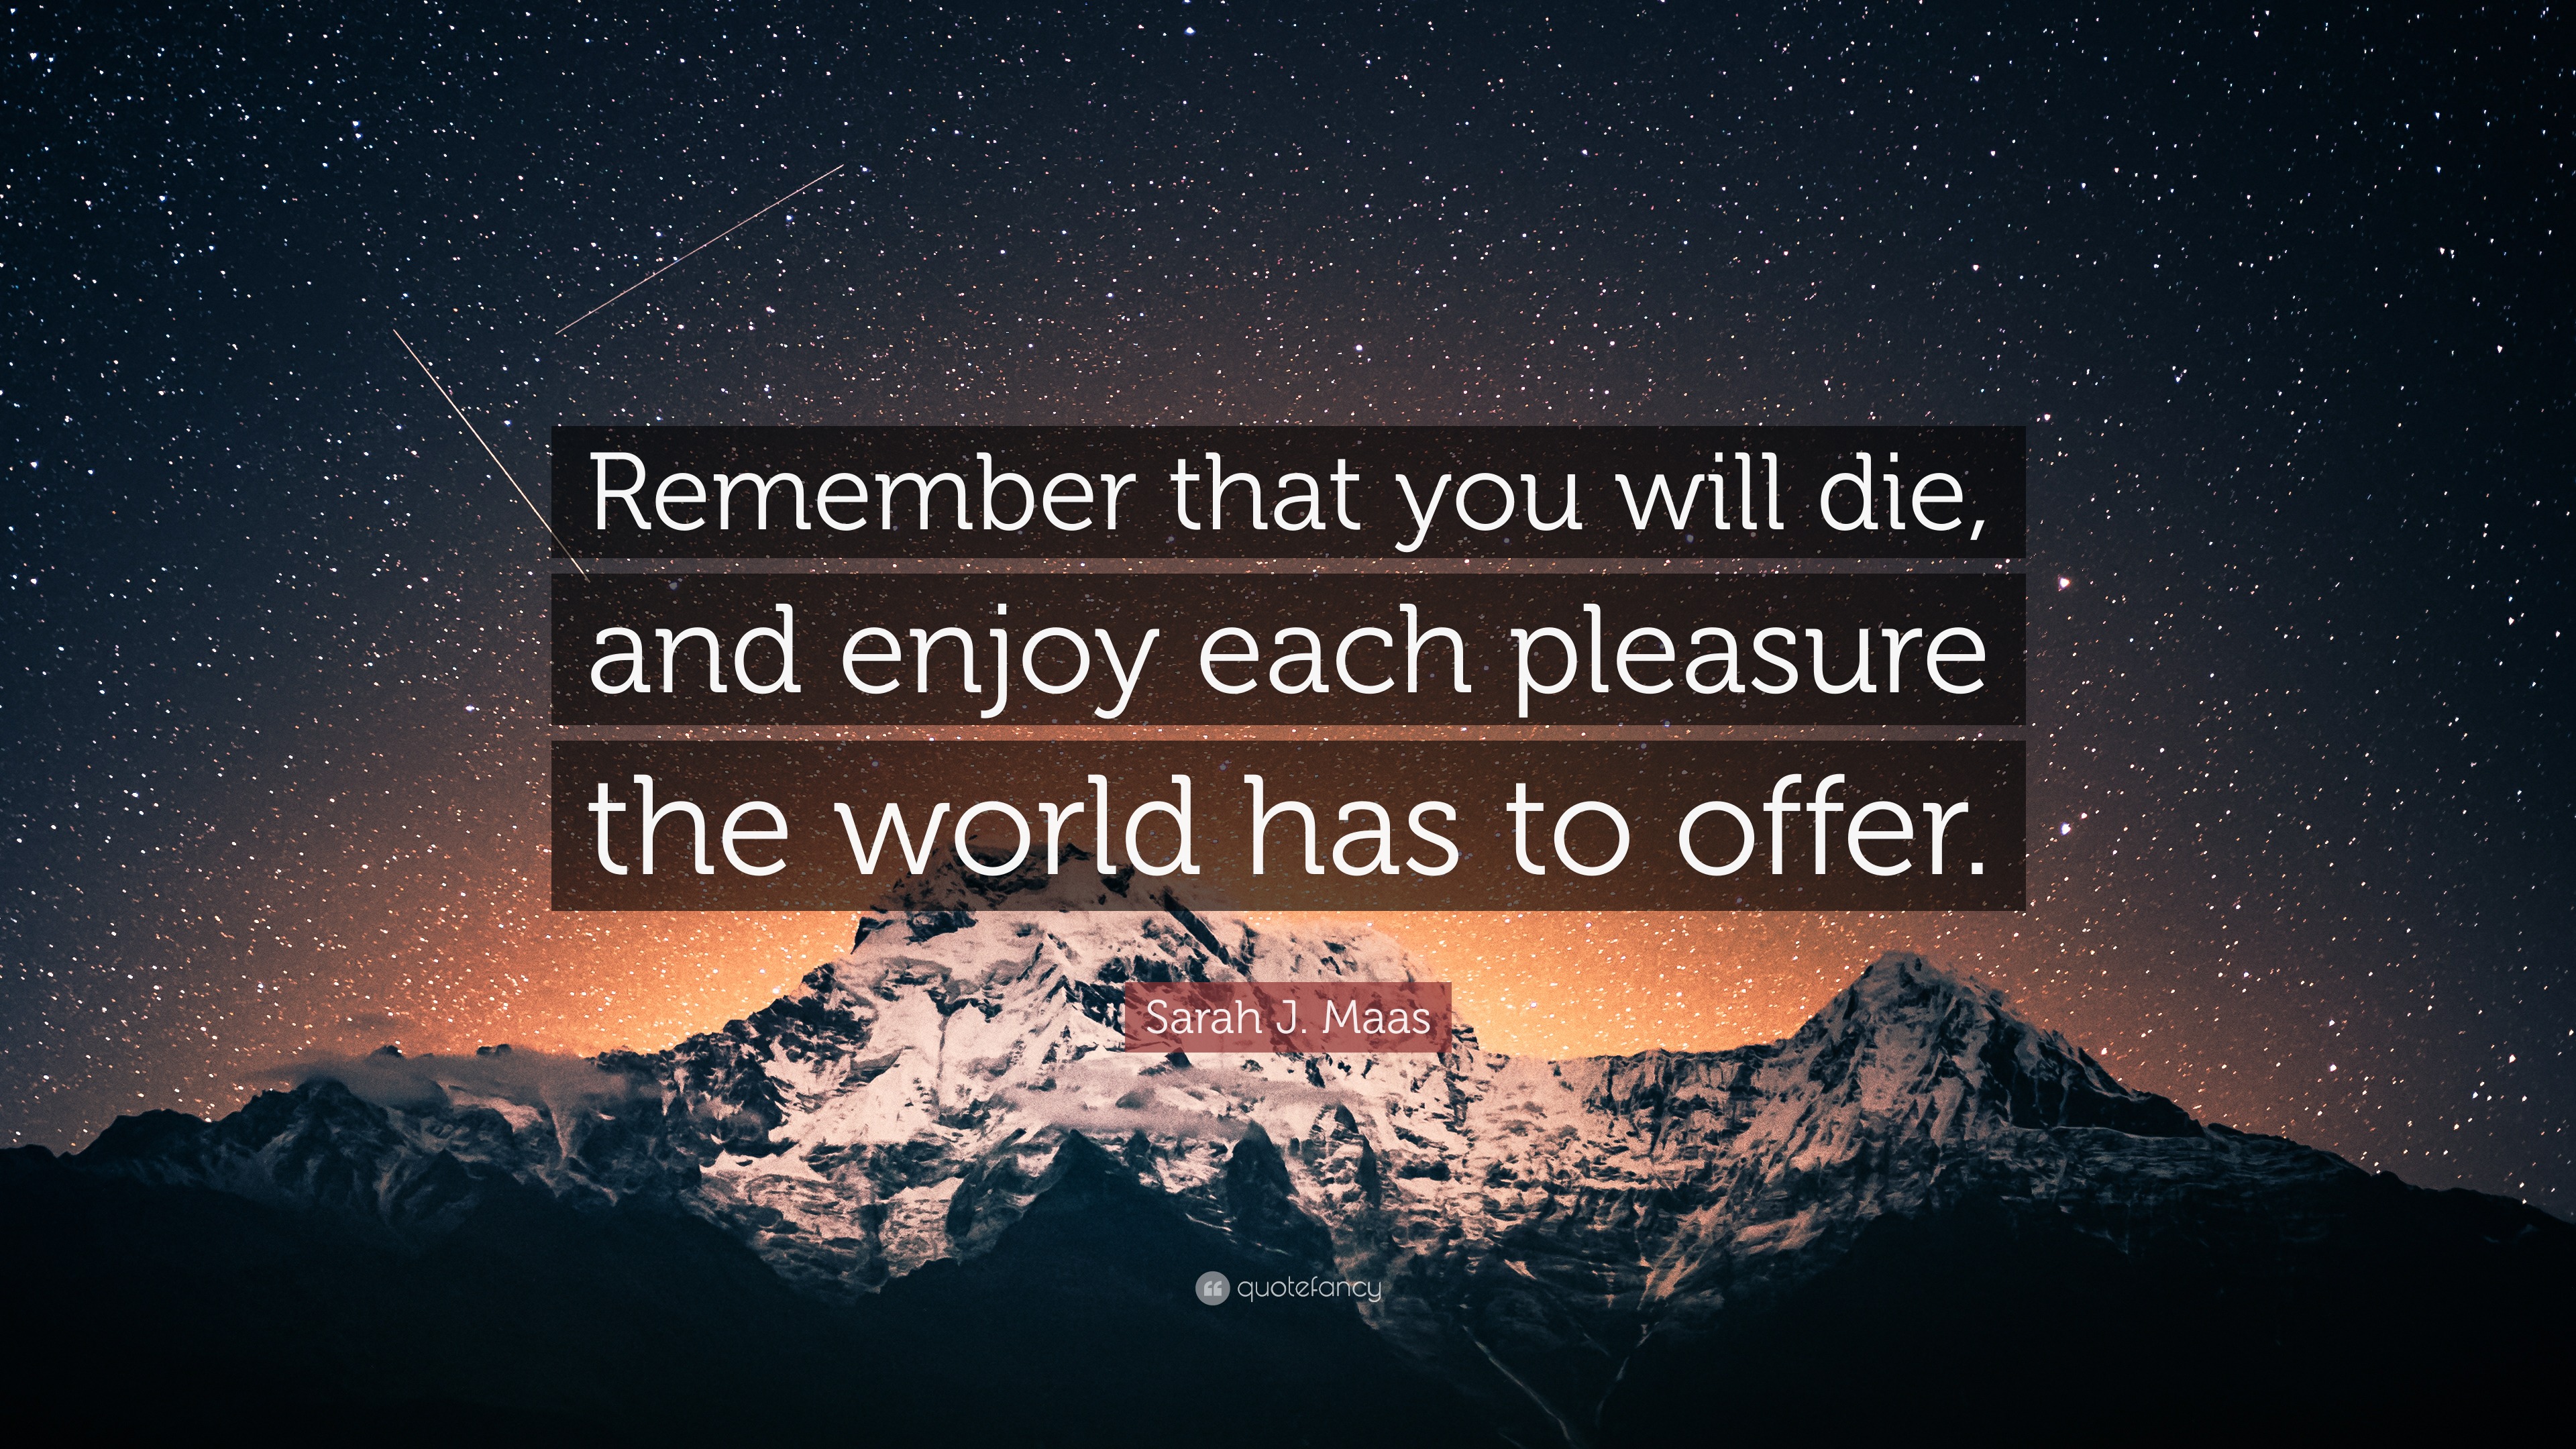 Sarah J. Maas Quote: “Remember that you will die, and enjoy each pleasure  the world has